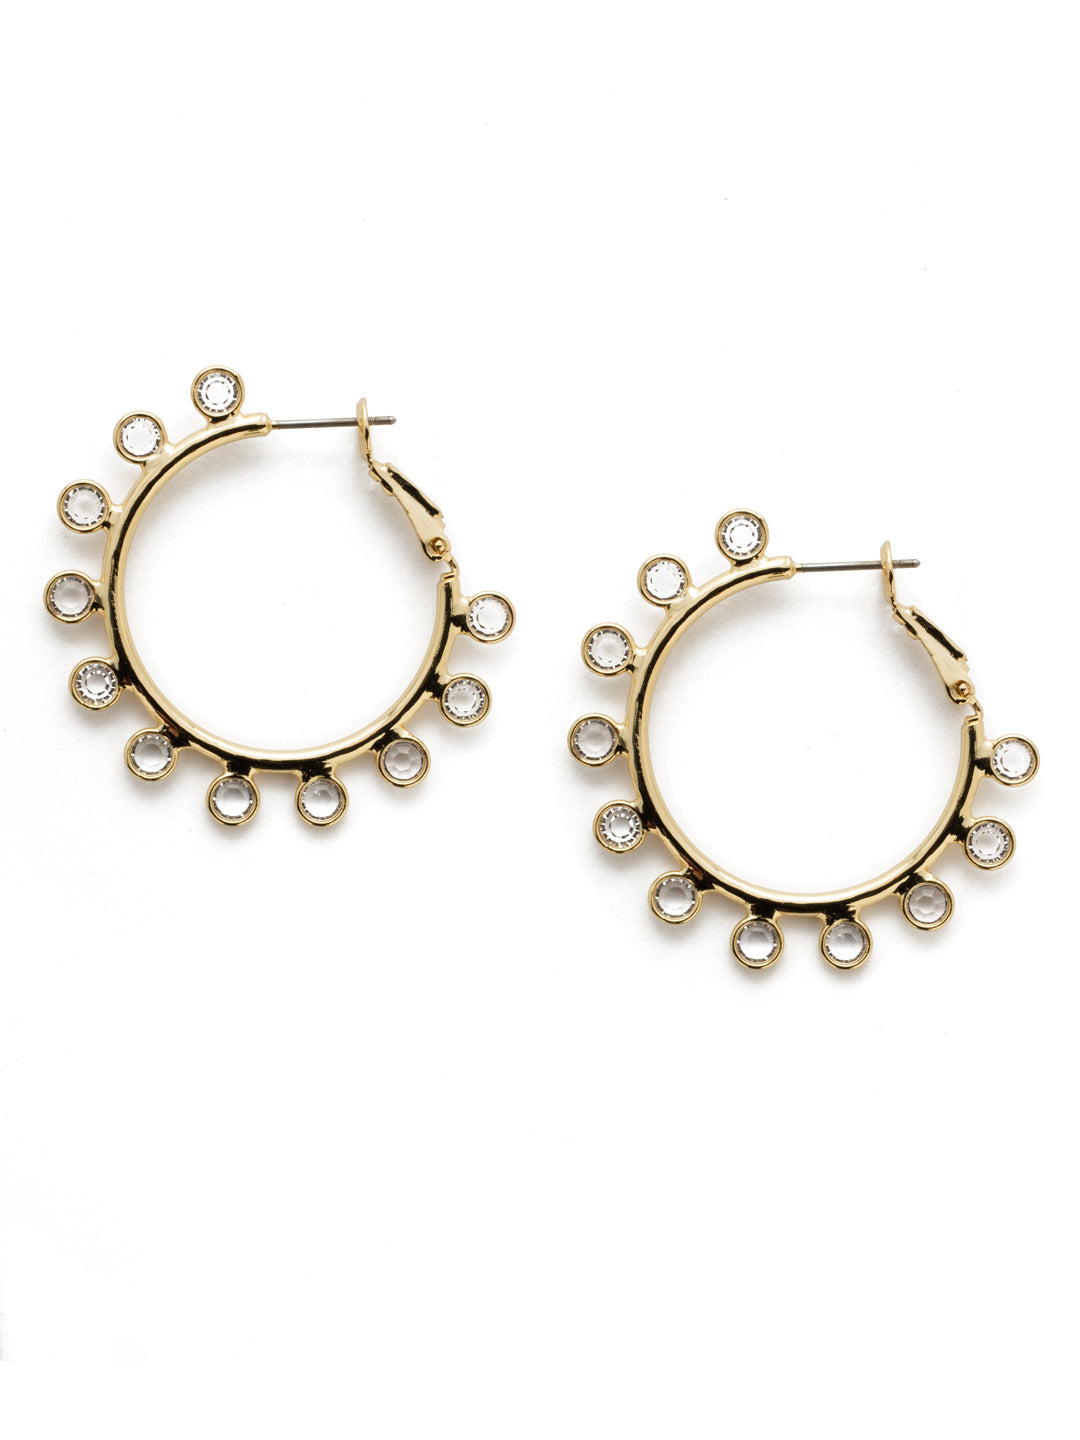 Charming Crystal Hoop Earrings - 4EEK22BGCRY - <p>Take your metal hoops up a notch by fastening on drops of cystals that stand out and demand to be noticed. From Sorrelli's Crystal collection in our Bright Gold-tone finish.</p>